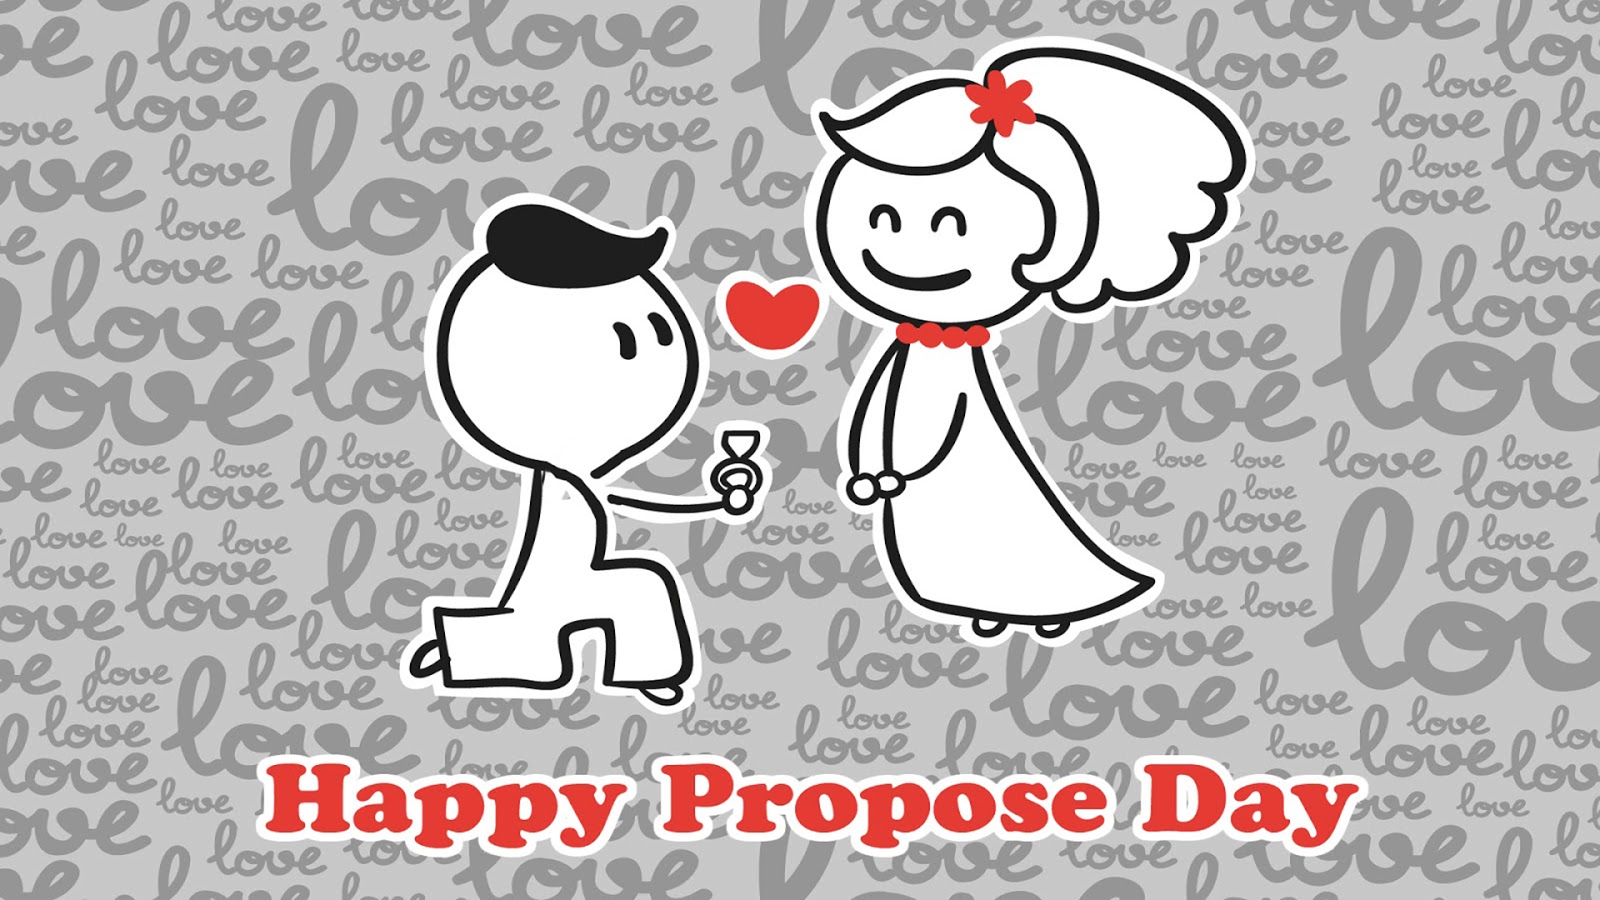 Happy Propose Day Hd Download Free 1080p Wallpaper - Propose Day Image Hd , HD Wallpaper & Backgrounds